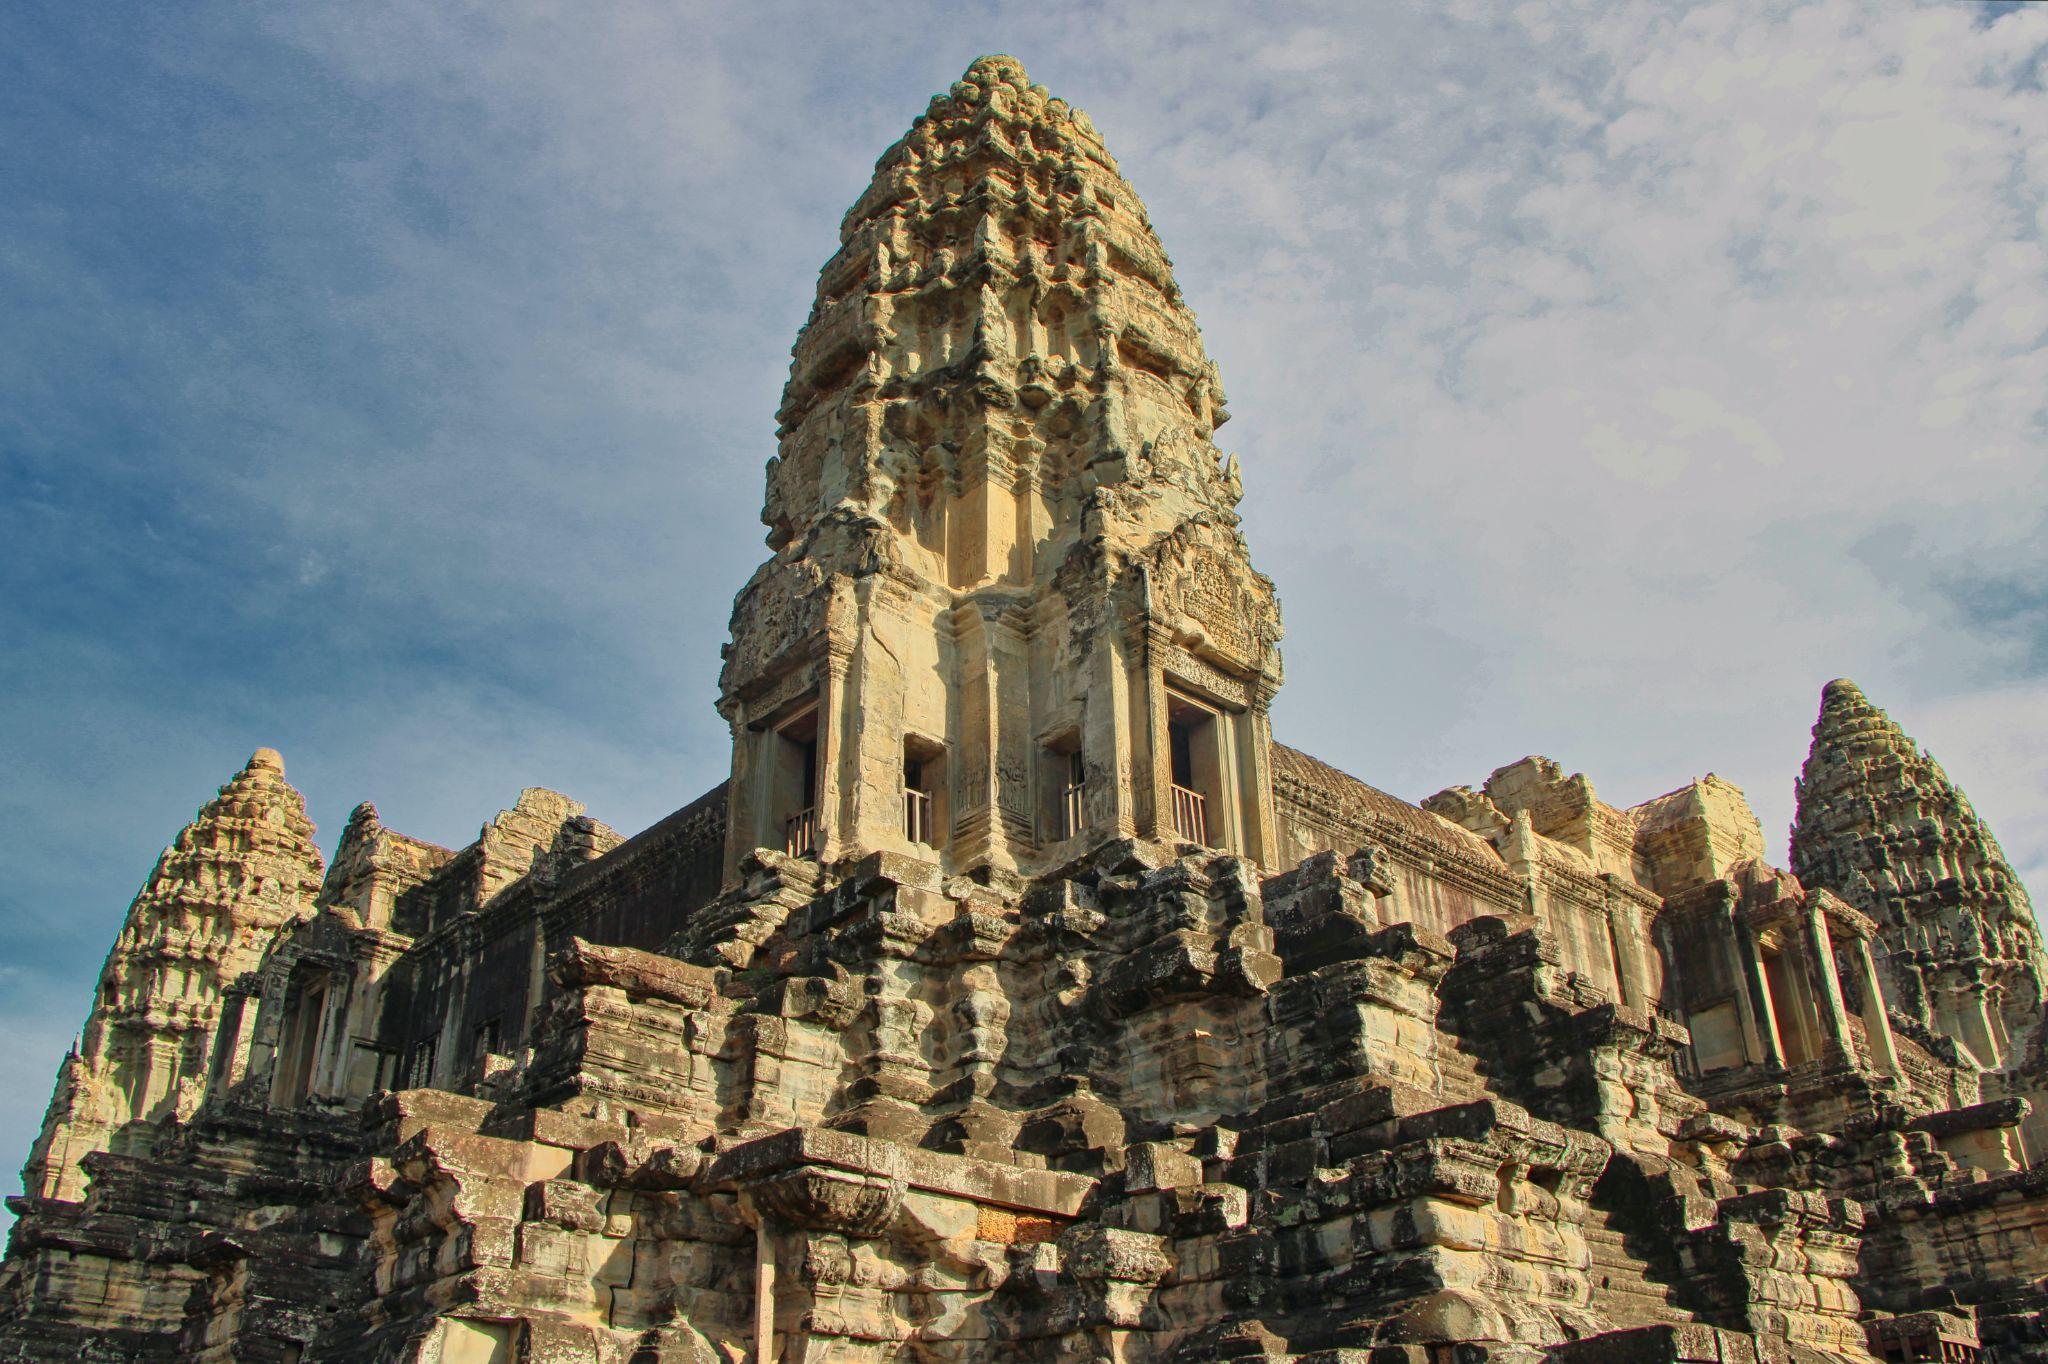 An image of Angkor Wat which is a dream destination for many Buddhists